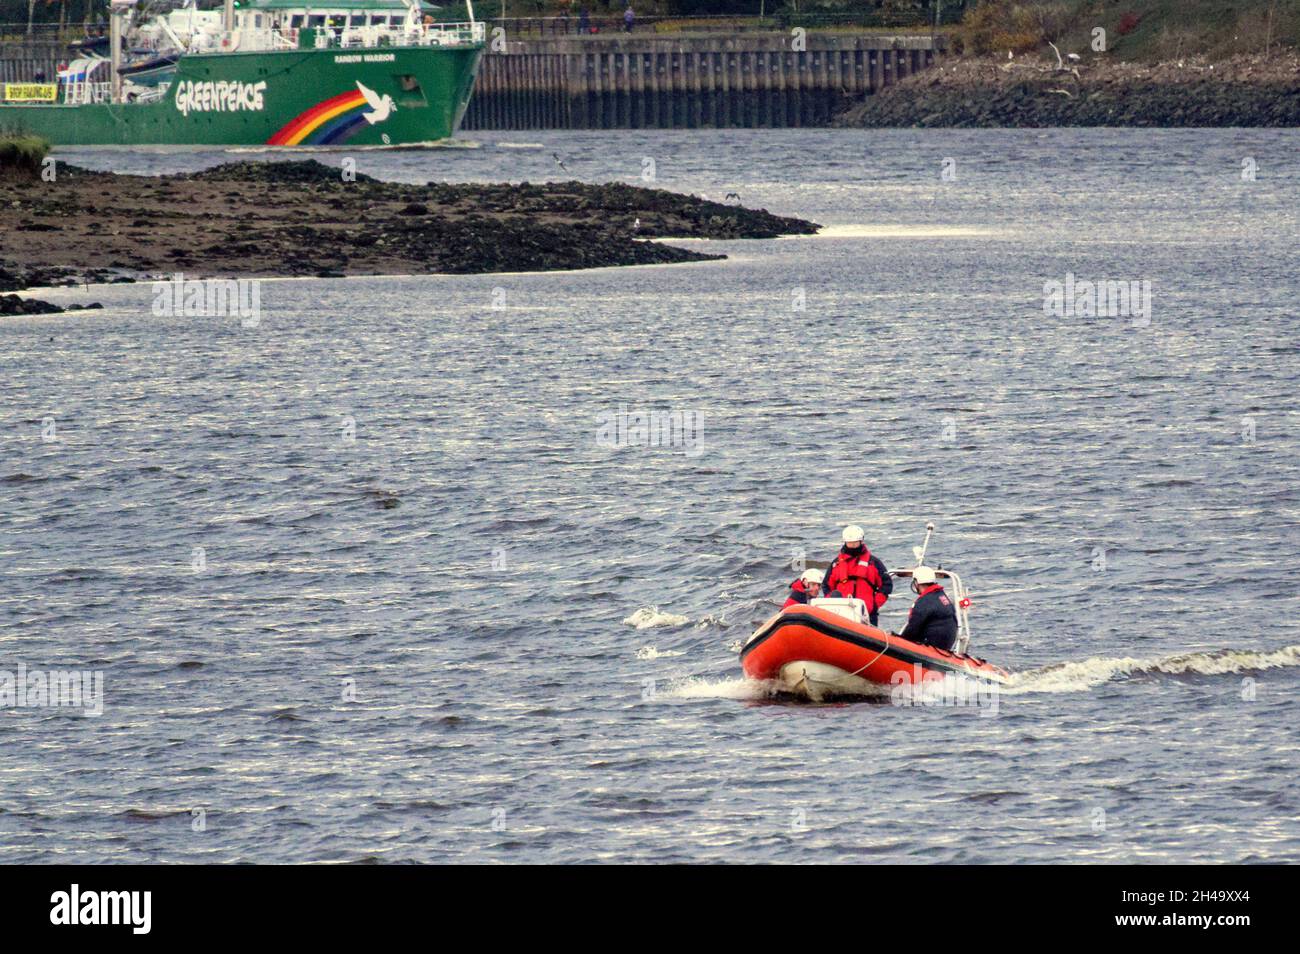 Glasgow, Scotland, UK 1st November, 2021.UK  Weather: Rainbow warrior passed under the erskine bridge into the clyde and by the clyde titan old shipbuilding crane where the great clyde liners were built  waved on by onlookers in clydebank escorted by rnli rubber dingy and a helicopter. .  Credit: Gerard Ferry/Alamy Live News Stock Photo